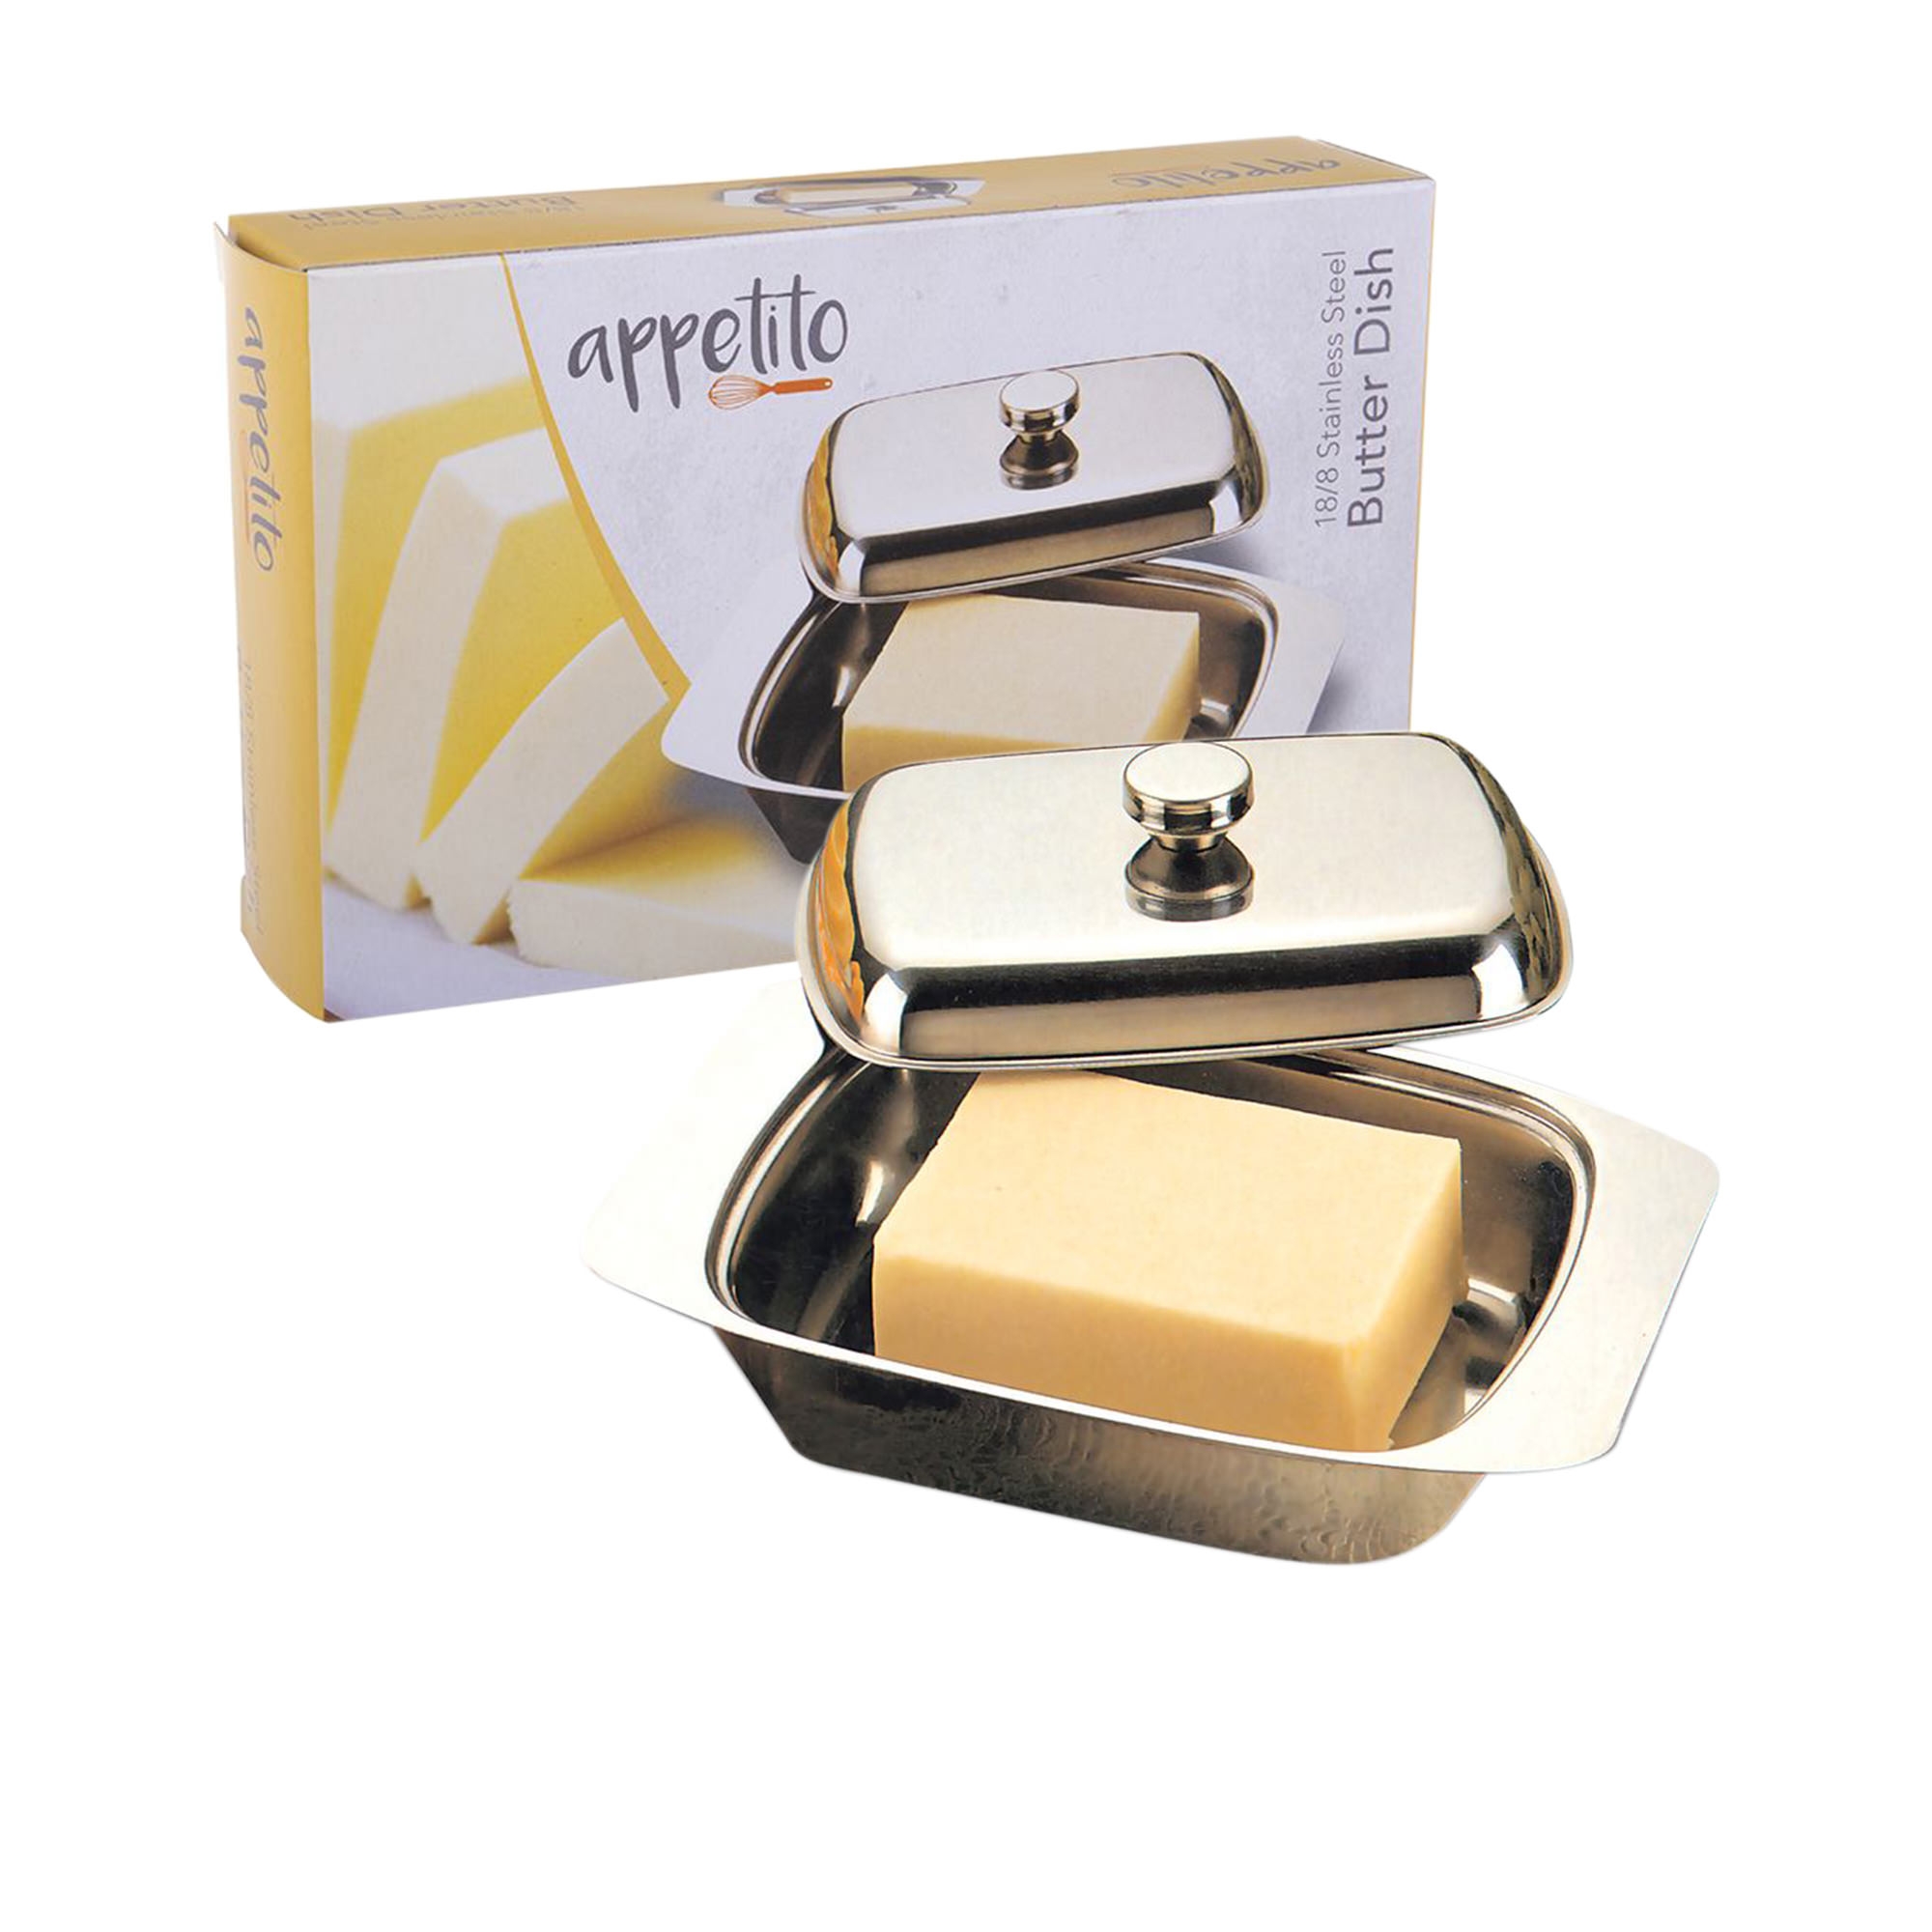 Appetito Stainless Steel Butter Dish with Cover Image 2